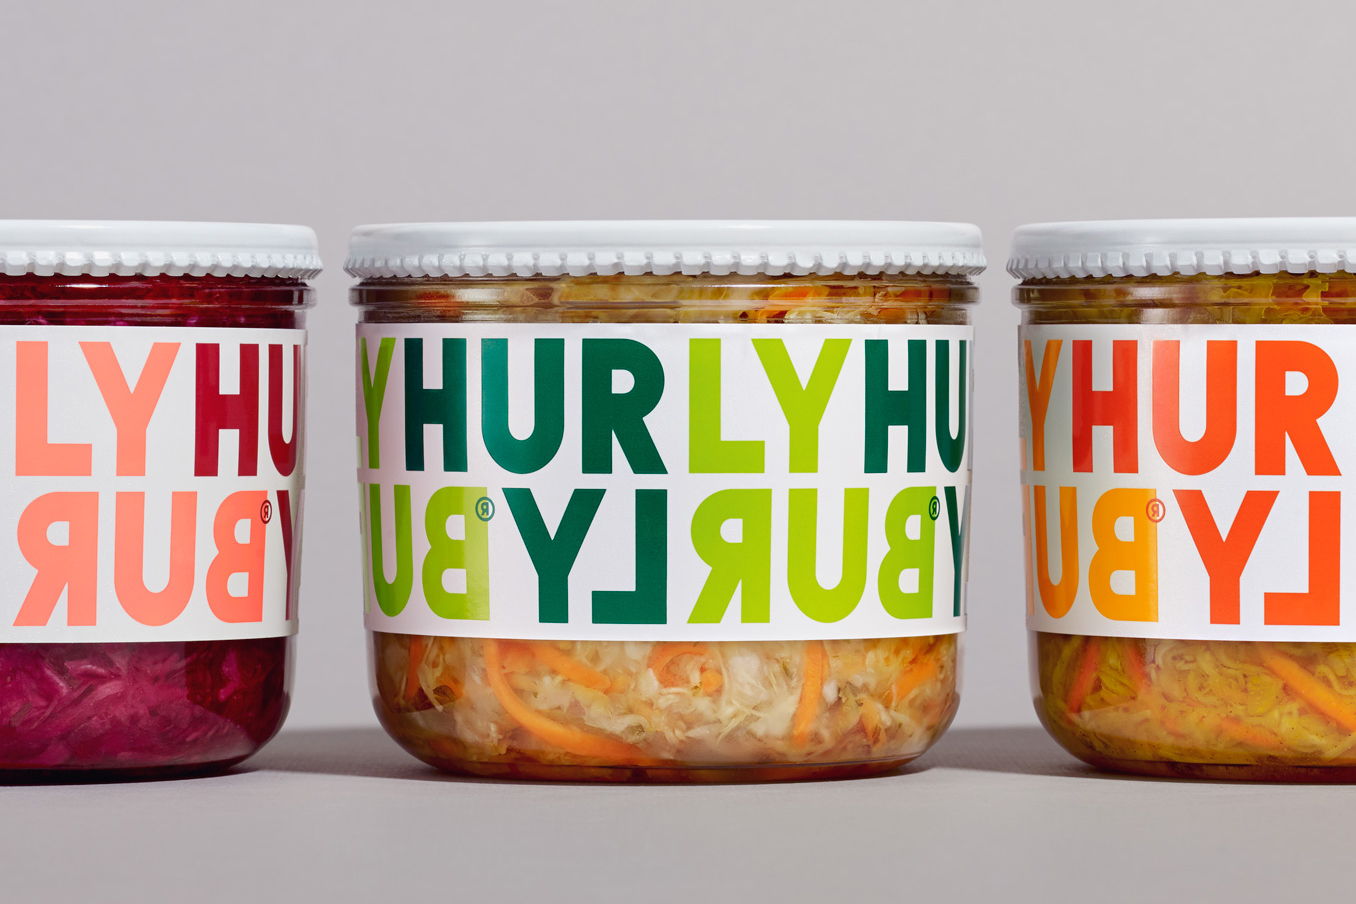 Packaging design by London-based Midday Studio for Hurly Burly and its range of raw slaw